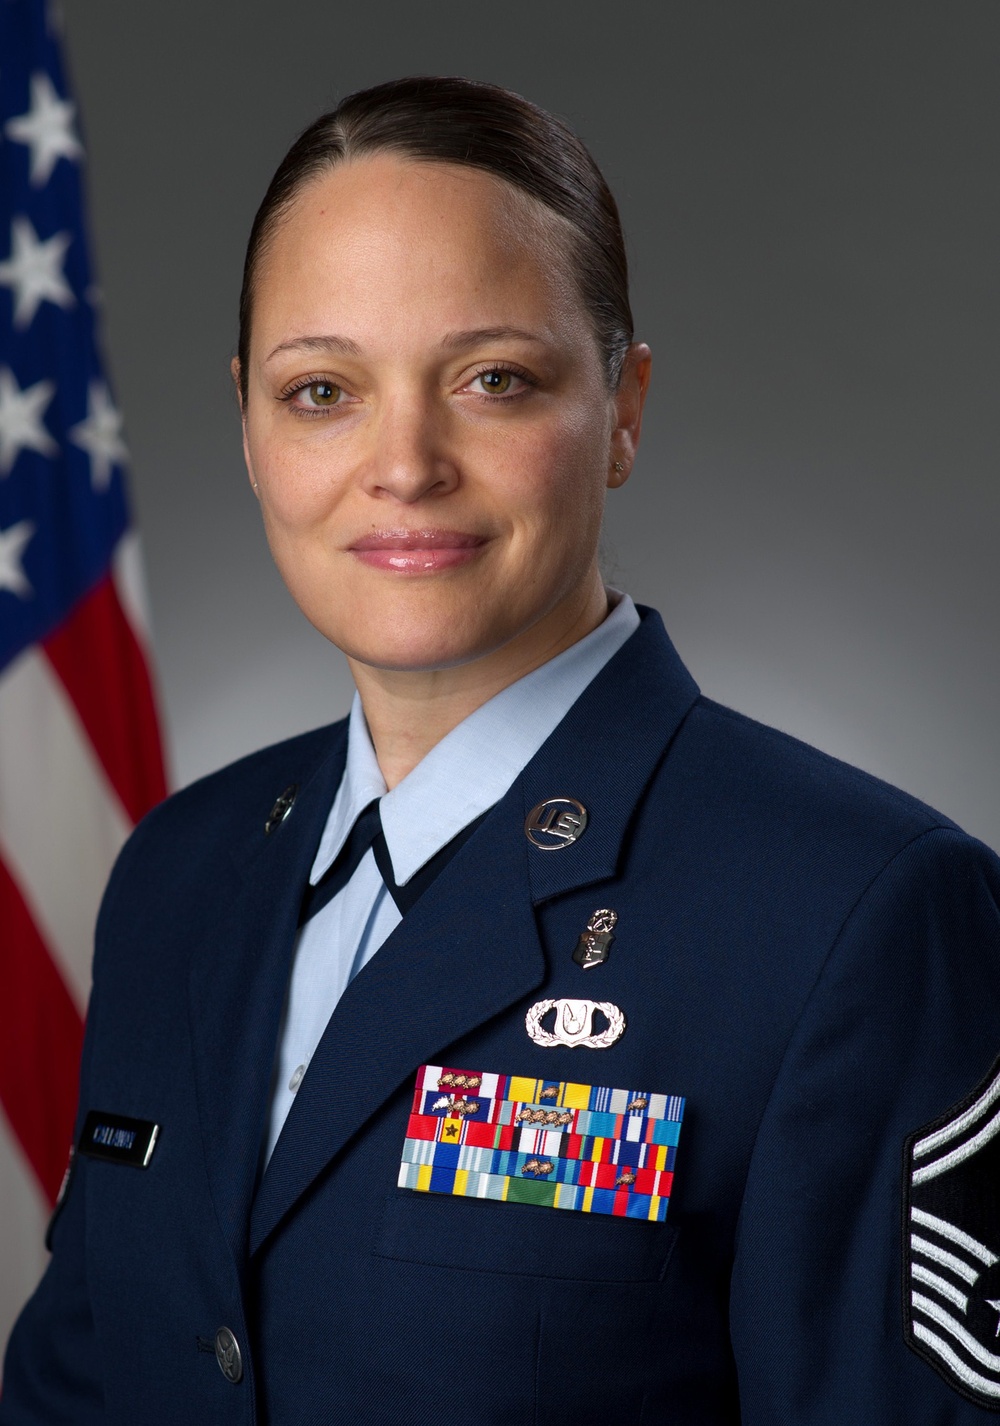 Cooperstown native earns 2011 ‘Senior Non-commissioned Officer of the Year’ award from Air Force’s Air Mobility Command